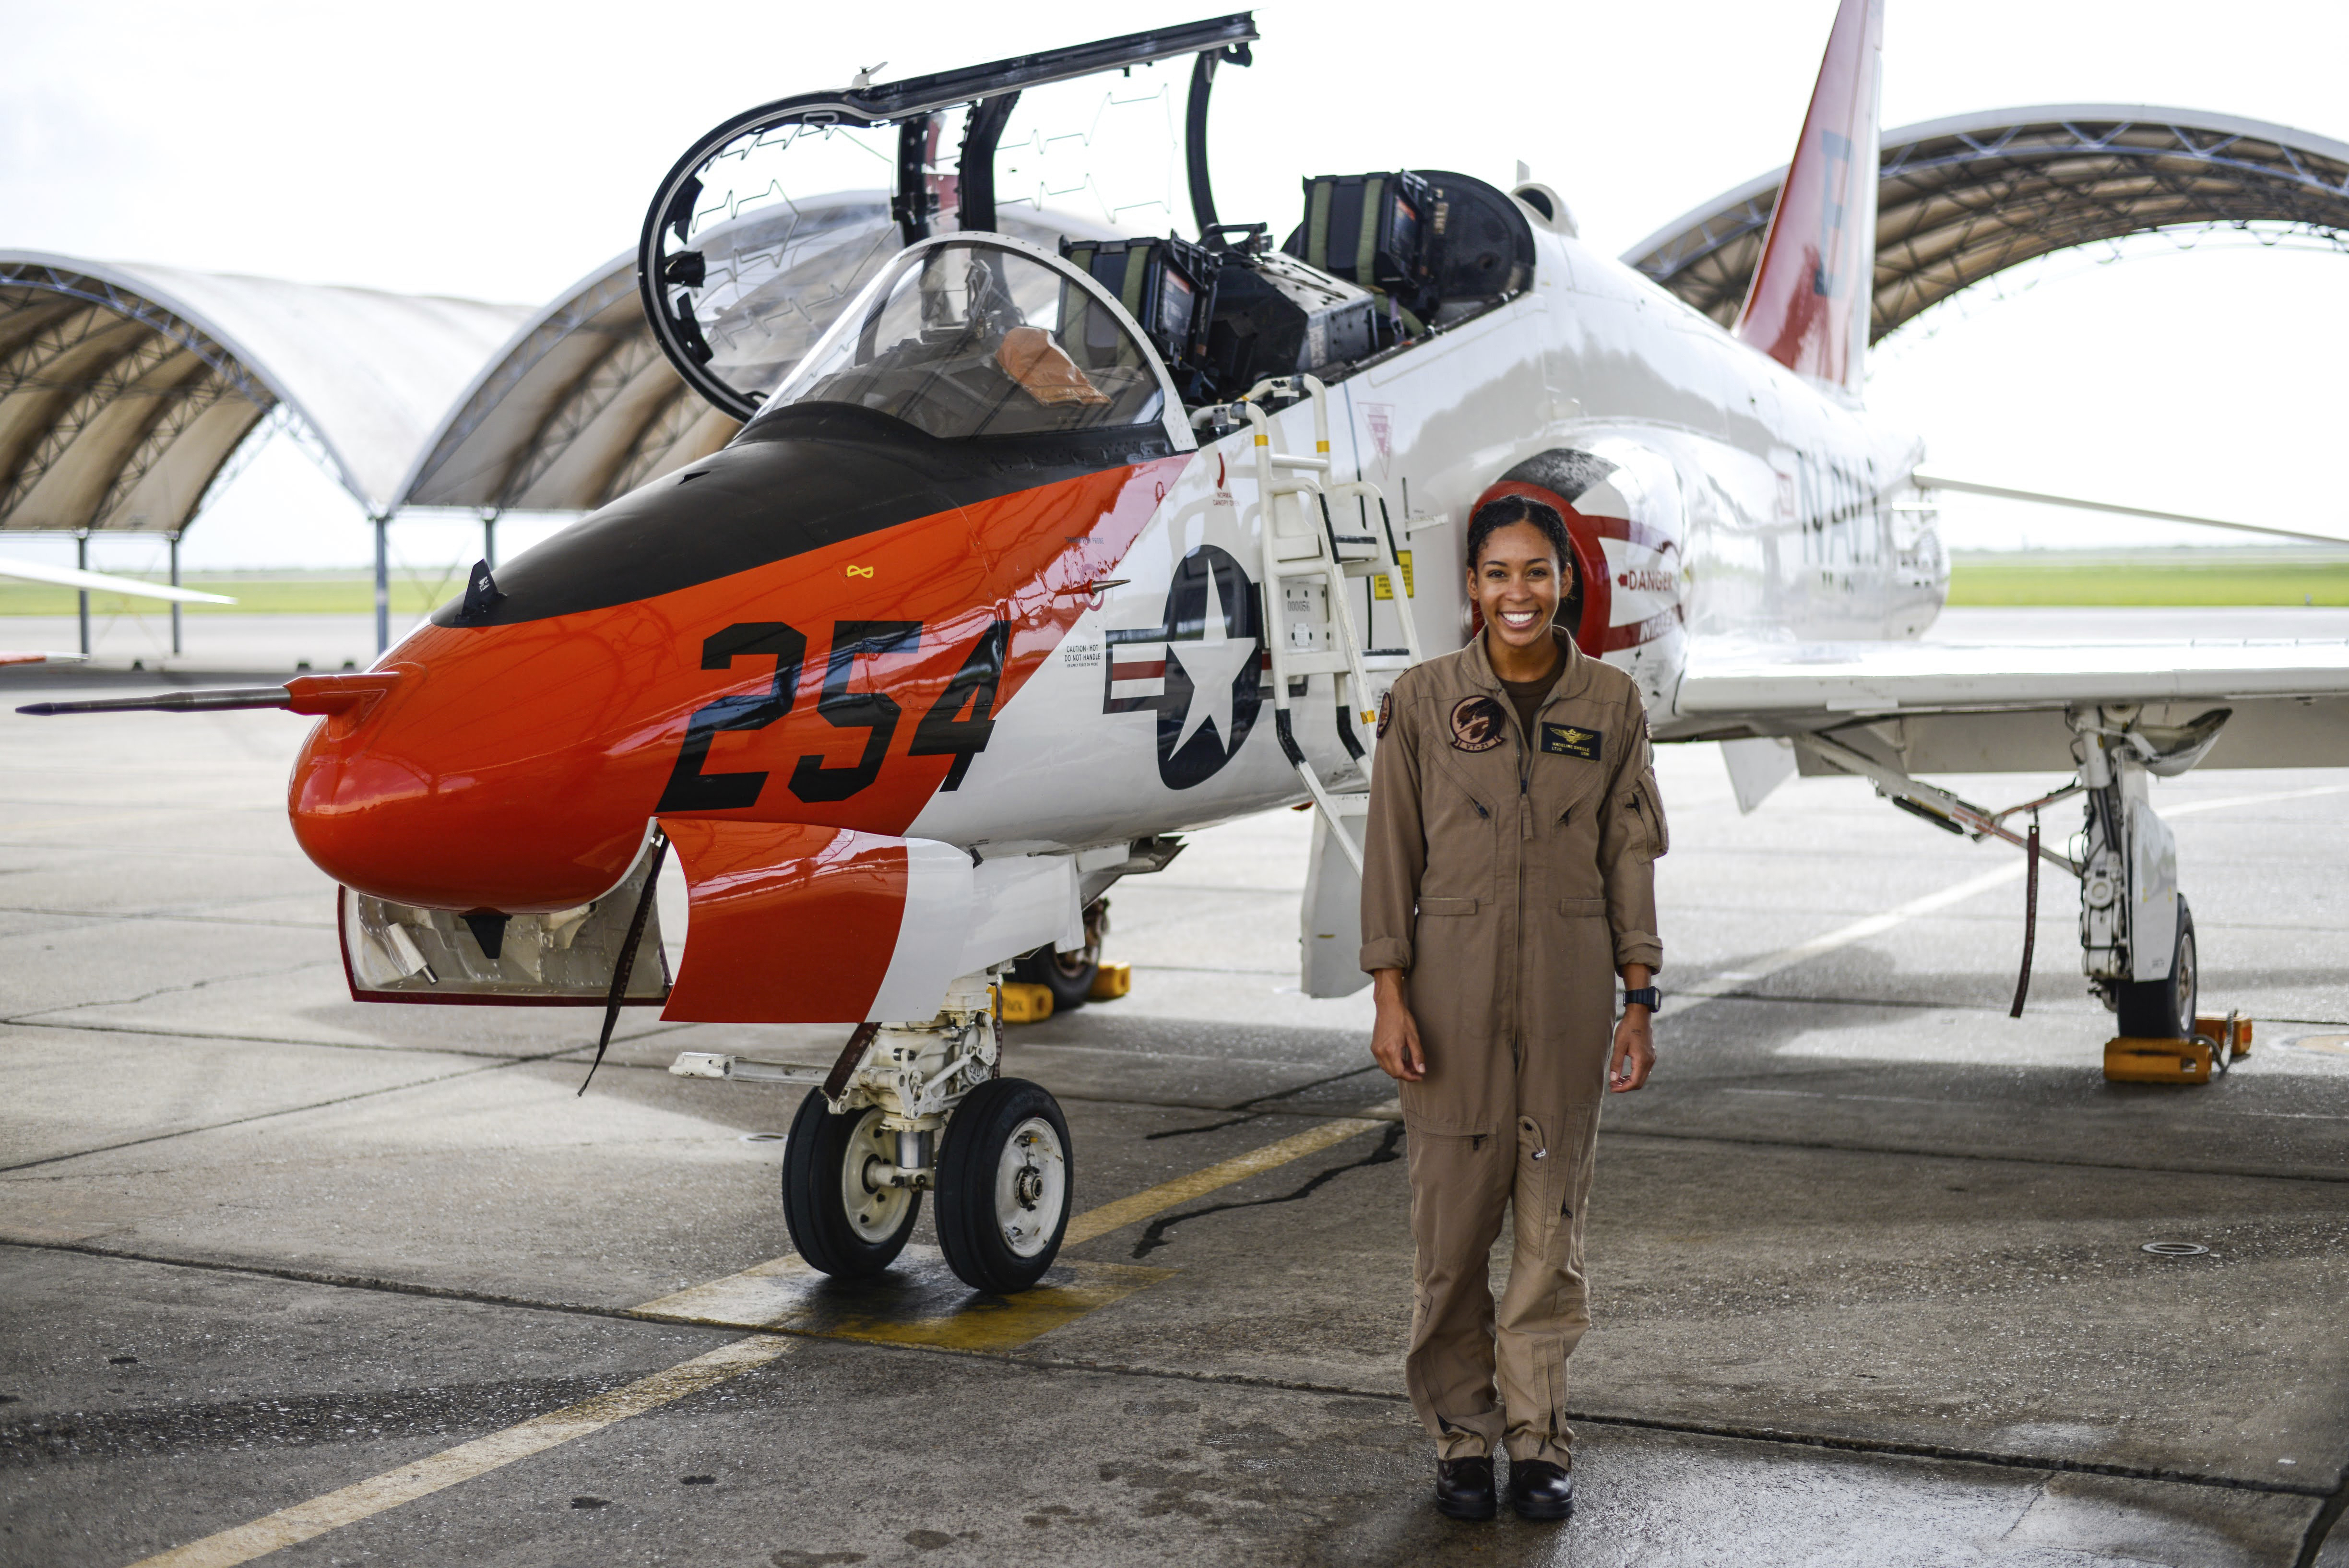 In this photo provided by the U.S. Navy, student Naval aviator Lt. j.g. Madeline Swegle, assigned to the Redhawks of Training Squadron (VT) 21 at Naval Air Station Kingsville, Texas, stands by a T-45C Goshawk training aircraft following her final flight to complete the undergraduate Tactical Air (Strike) pilot training syllabus, July 7, 2020, in Kingsville, Texas. Swegle is the Navy's first known Black female strike aviator and will receive her Wings of Gold during a ceremony on July 31. Photo: AP